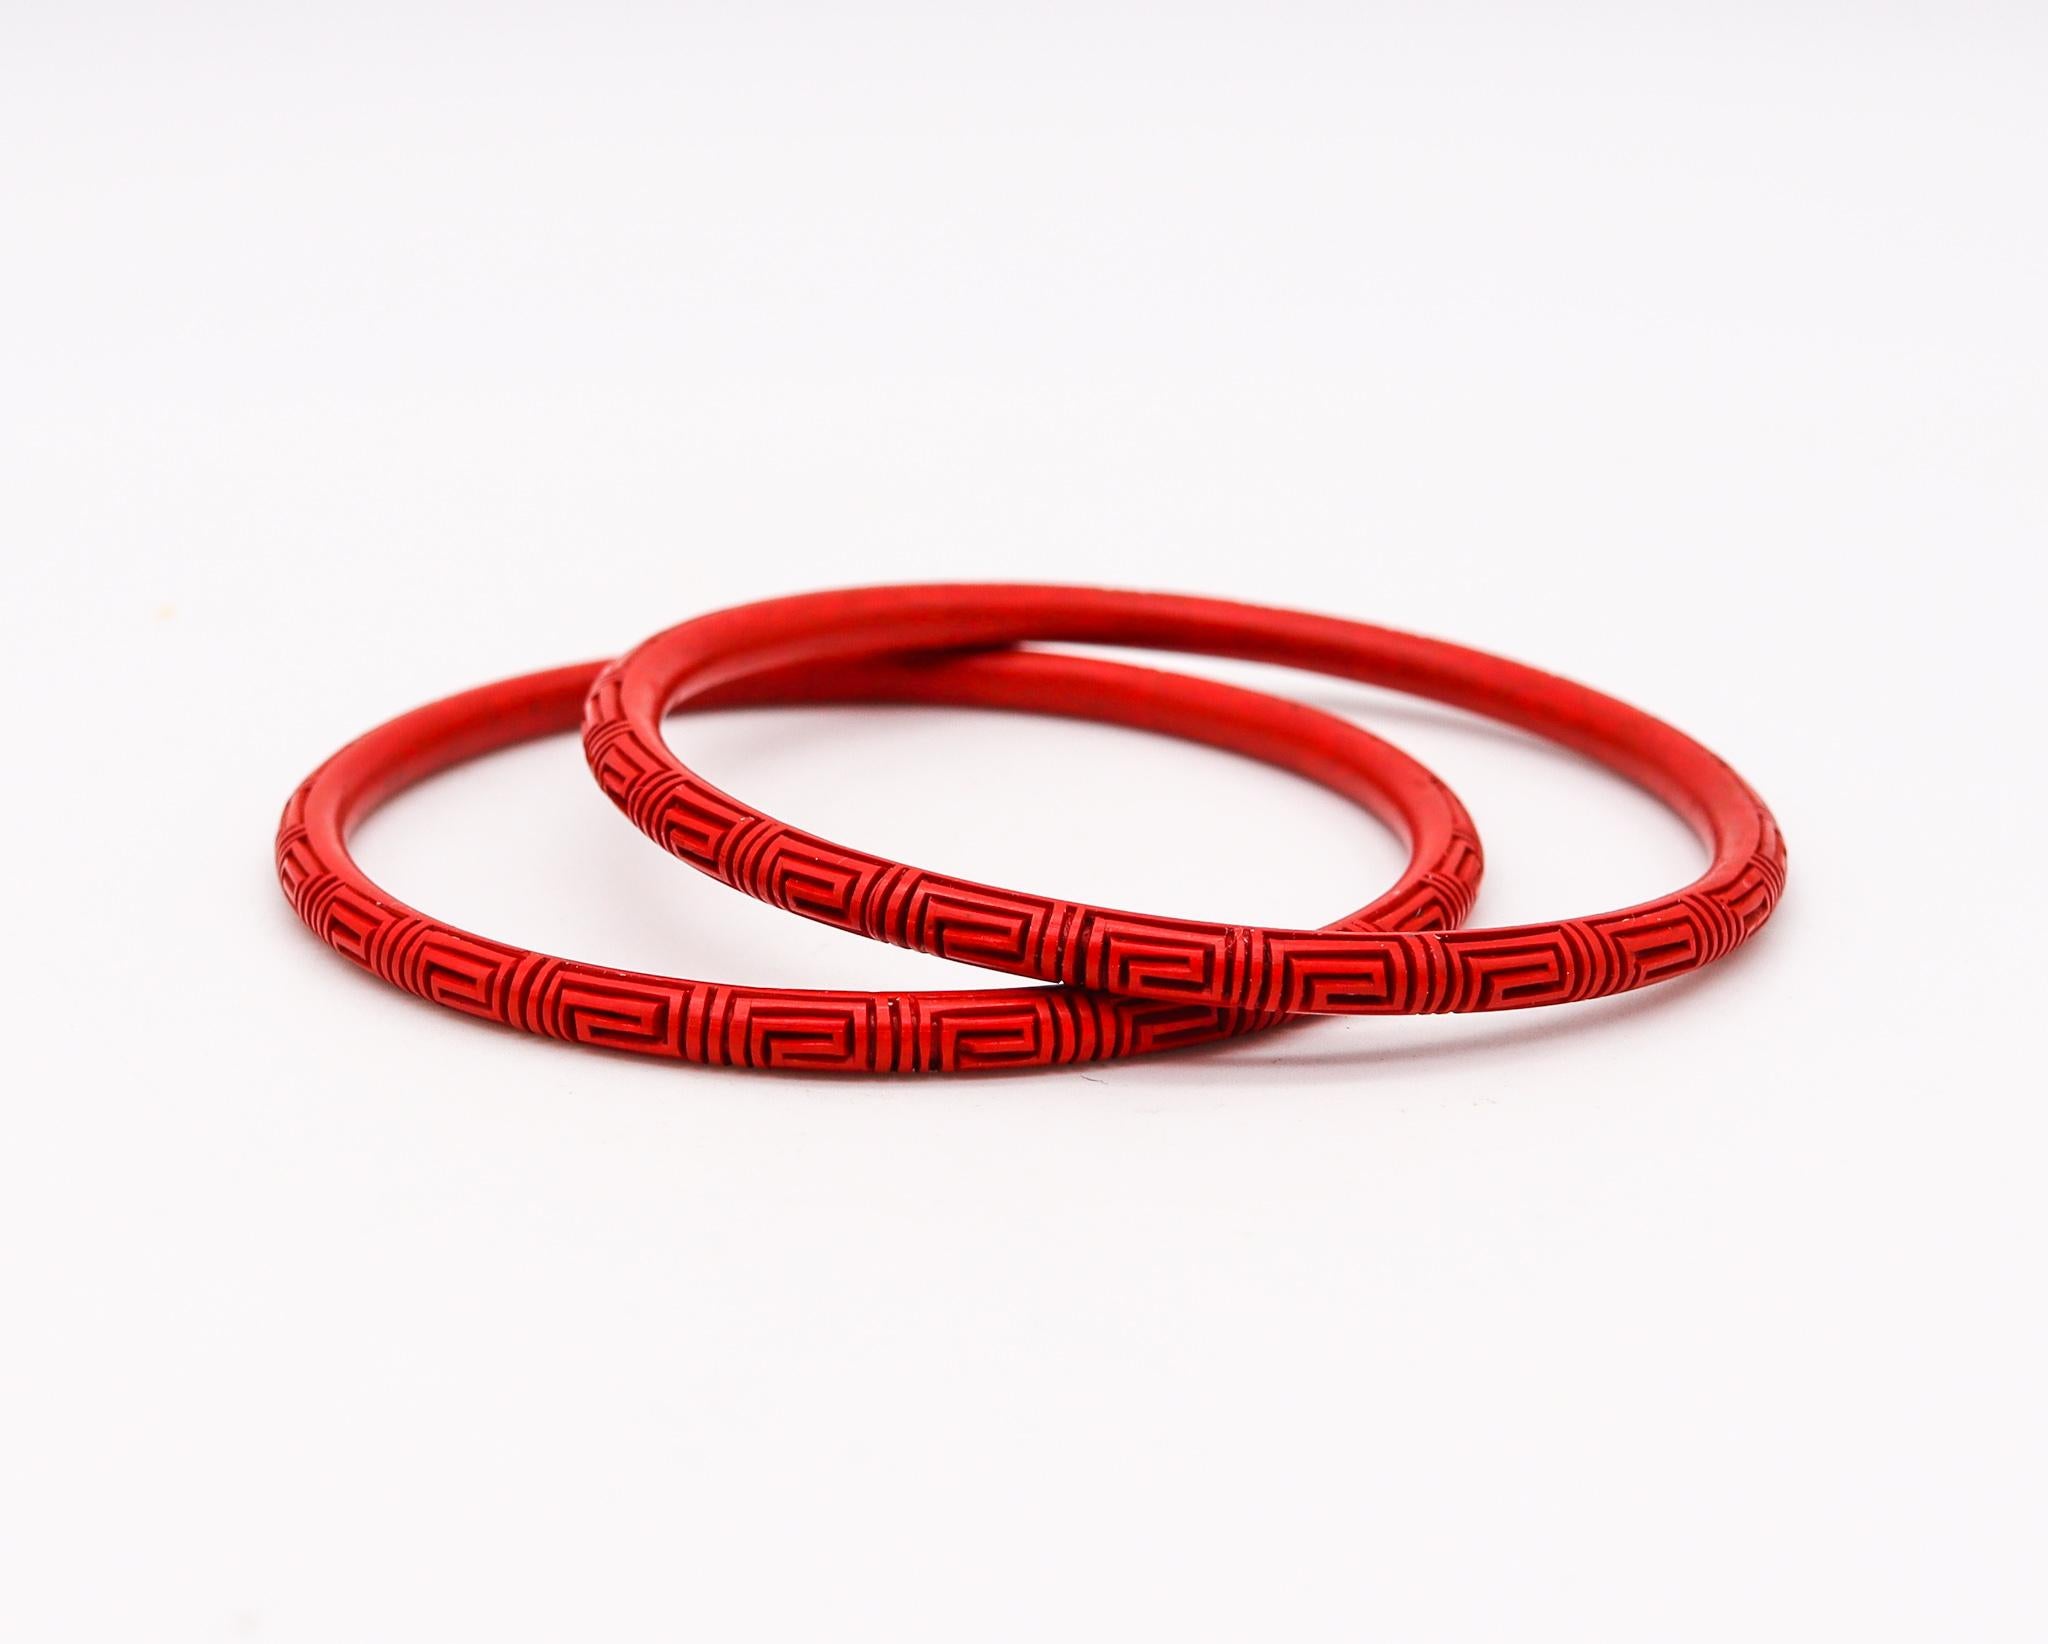 Pair of Cinnabar lacquer bangle bracelets.

Very nice antique Chinese export bangle bracelet, made in the late 19th century during the Victorian era (1838-1901), circa 1900. It is finely made in wood with red-bluish cinnabar lacquer and carved with